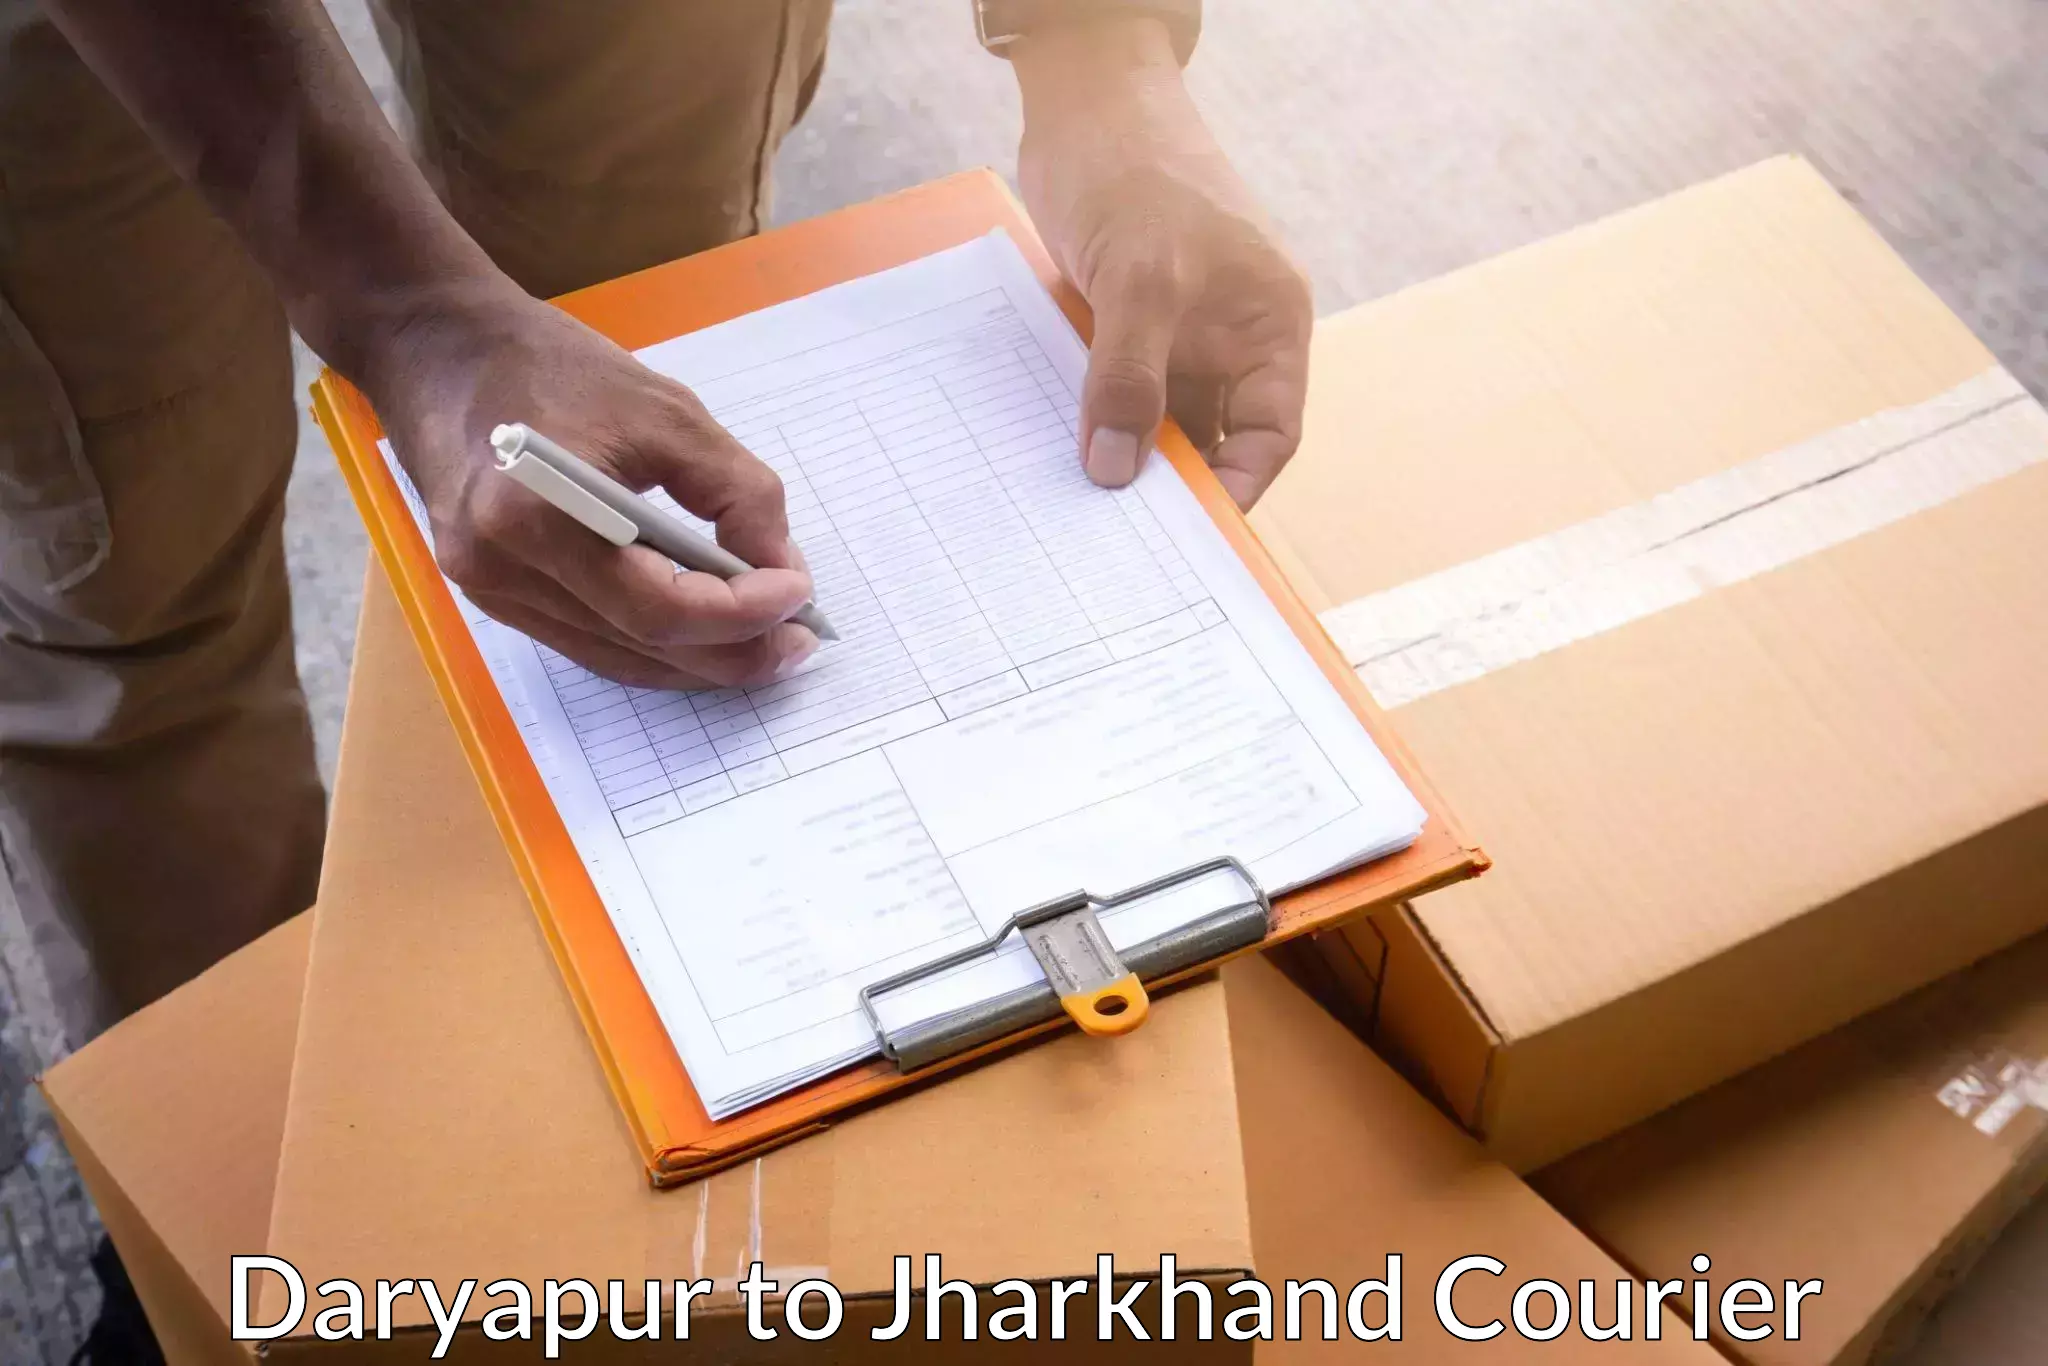 On-call courier service Daryapur to Dhanbad